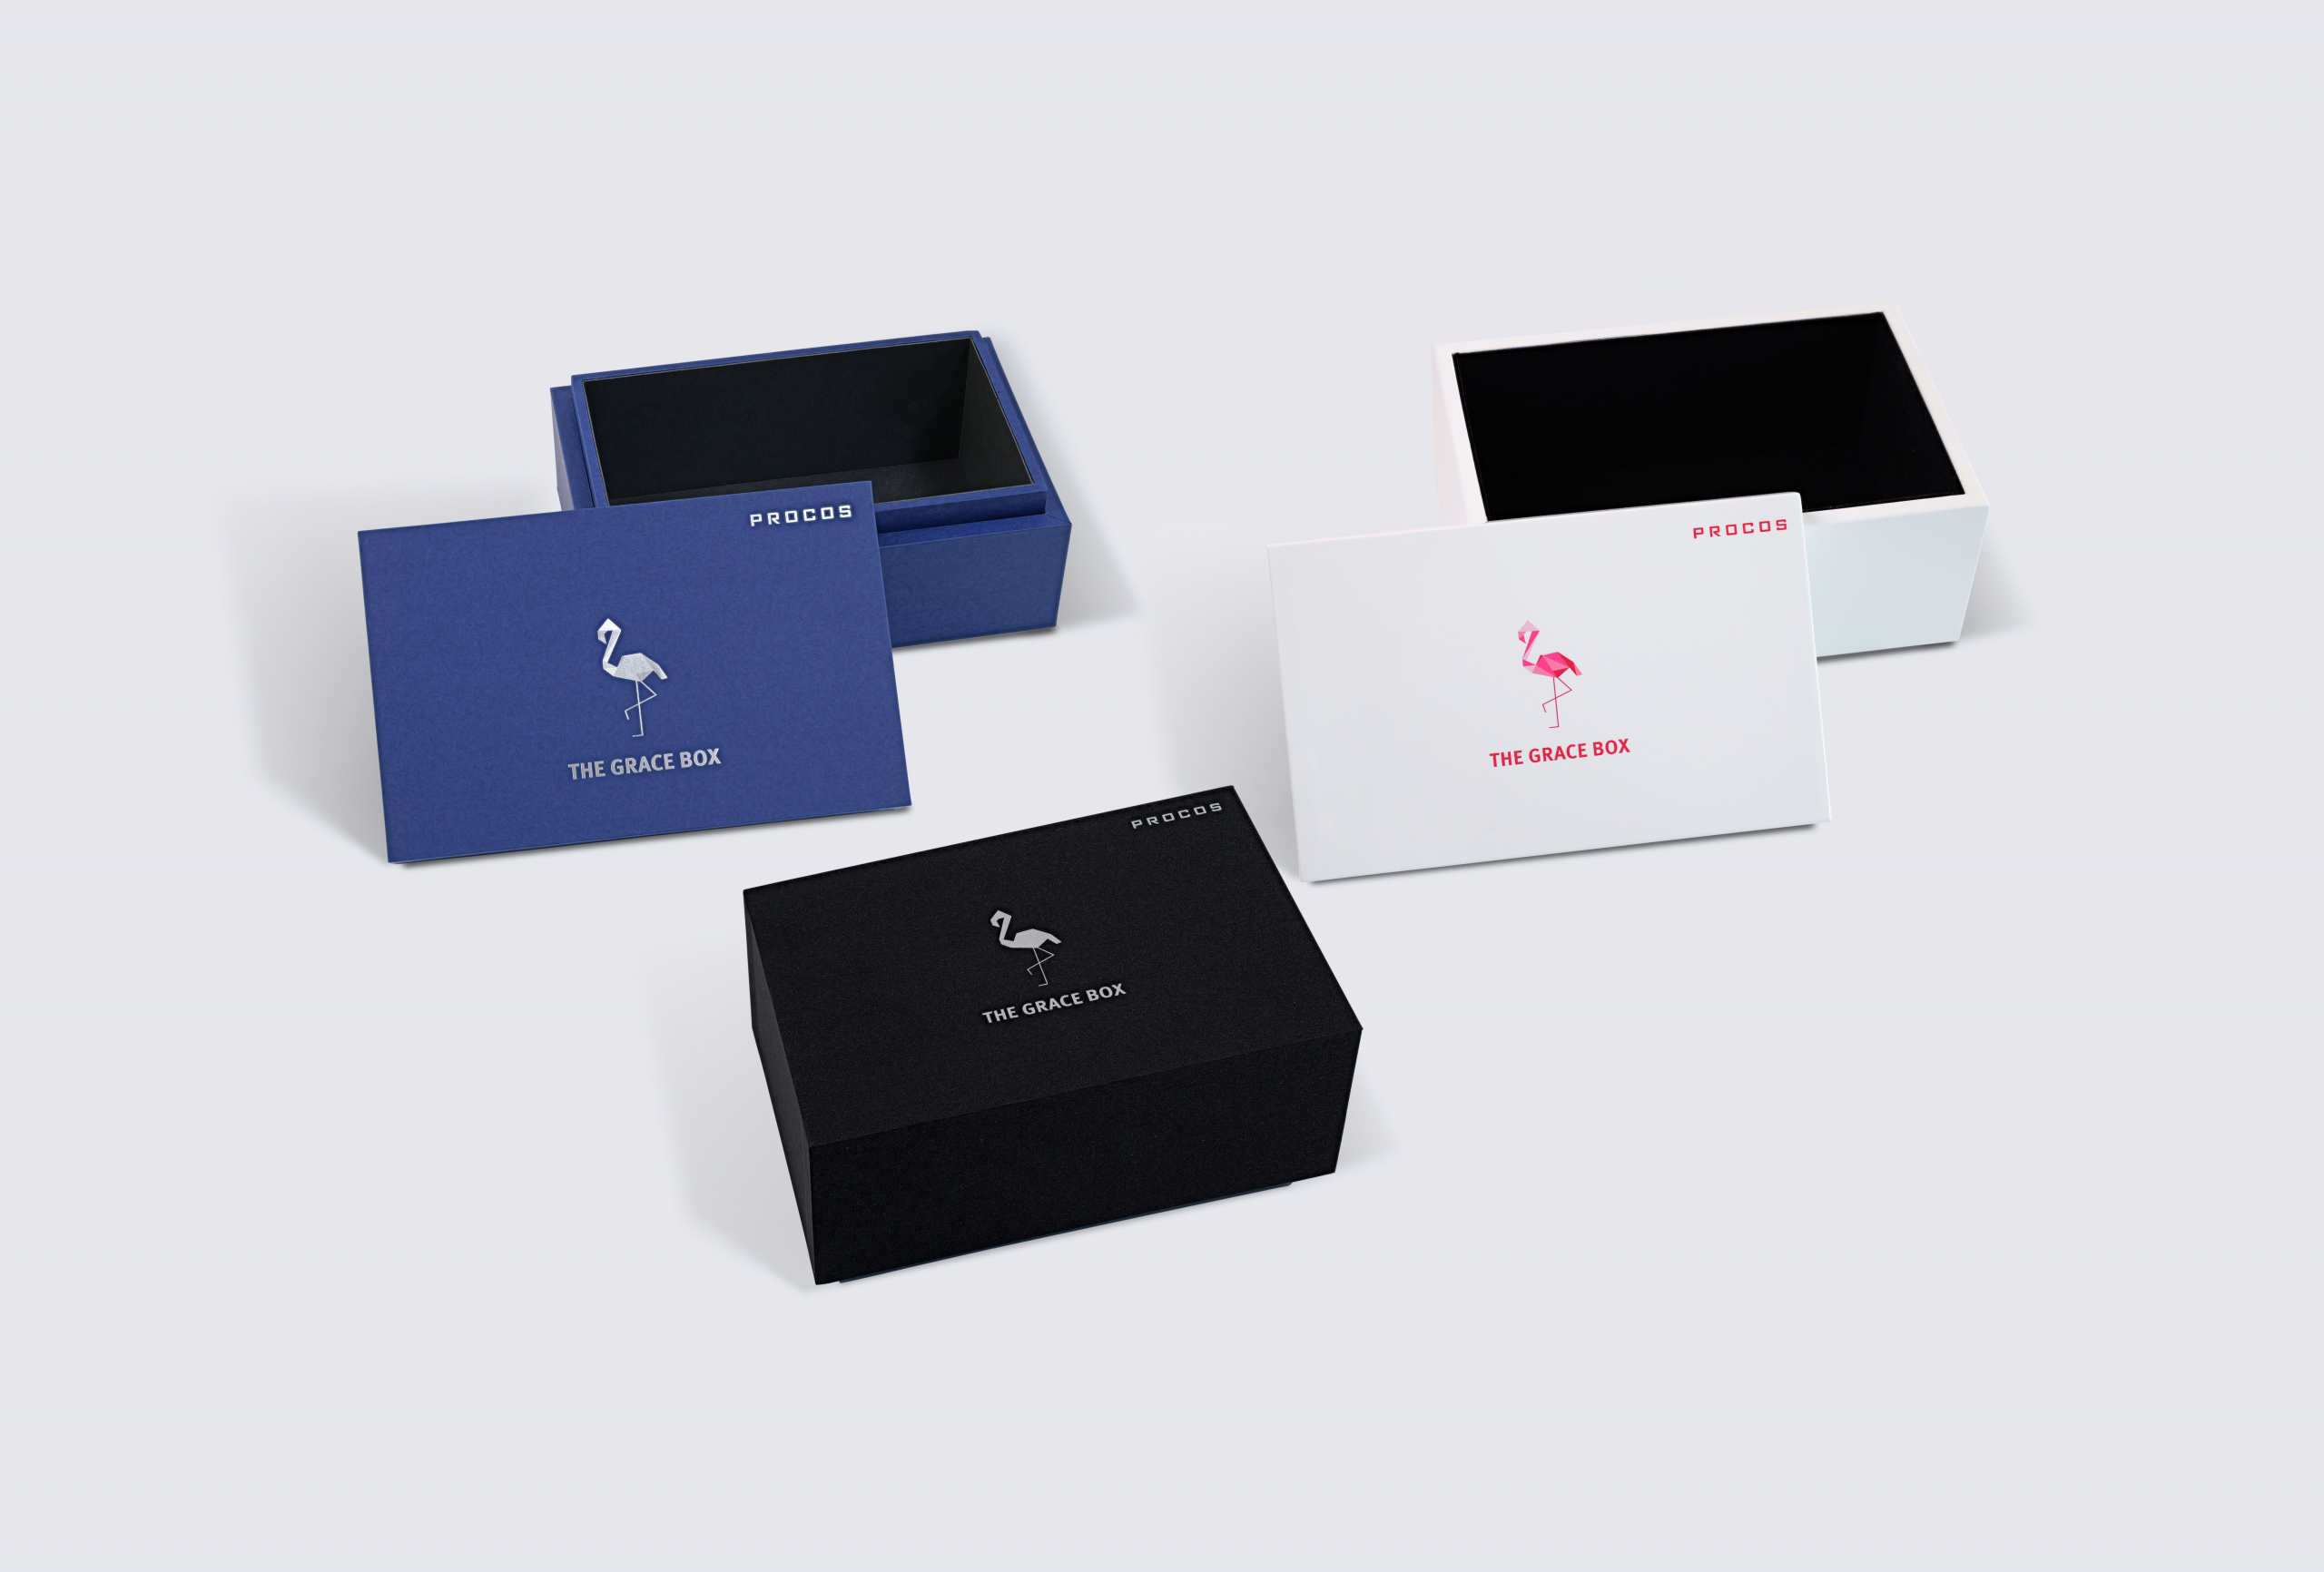 PROCOS presents the “GRACE BOX” at Luxe Pack Monaco. An elegant, refined and eco-responsible box